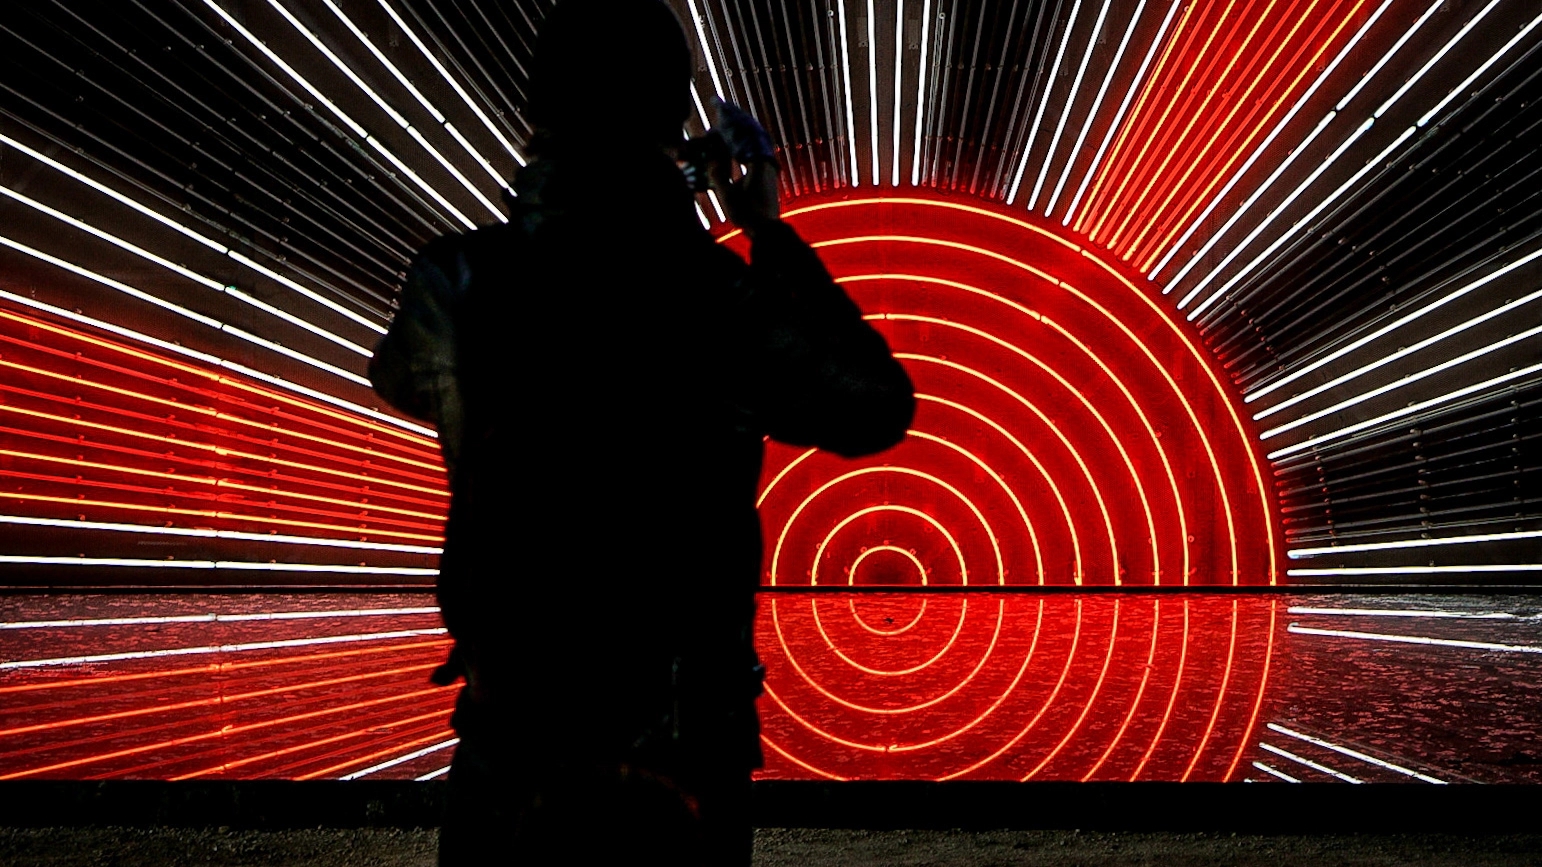 A shadowy figure stands with their back to the camera taking a shot of a light installation shaped like the Japanese imperial flag